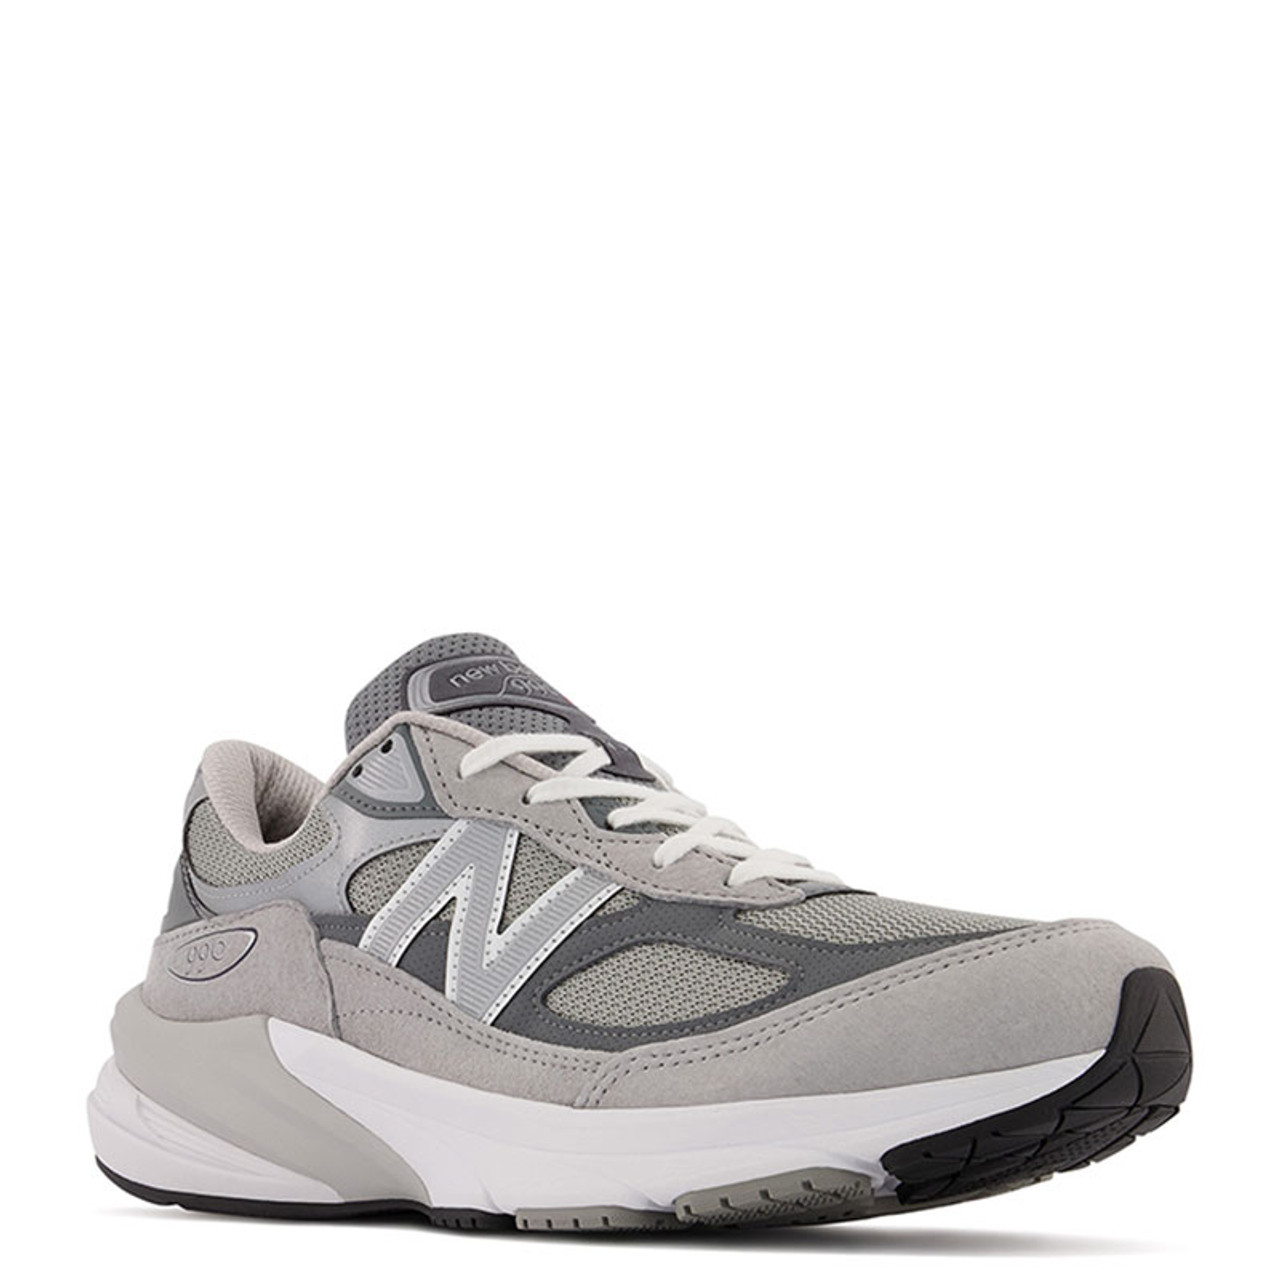 New Balance MADE in USA 990v6 Men's Grey Running Shoes - Family Footwear  Center